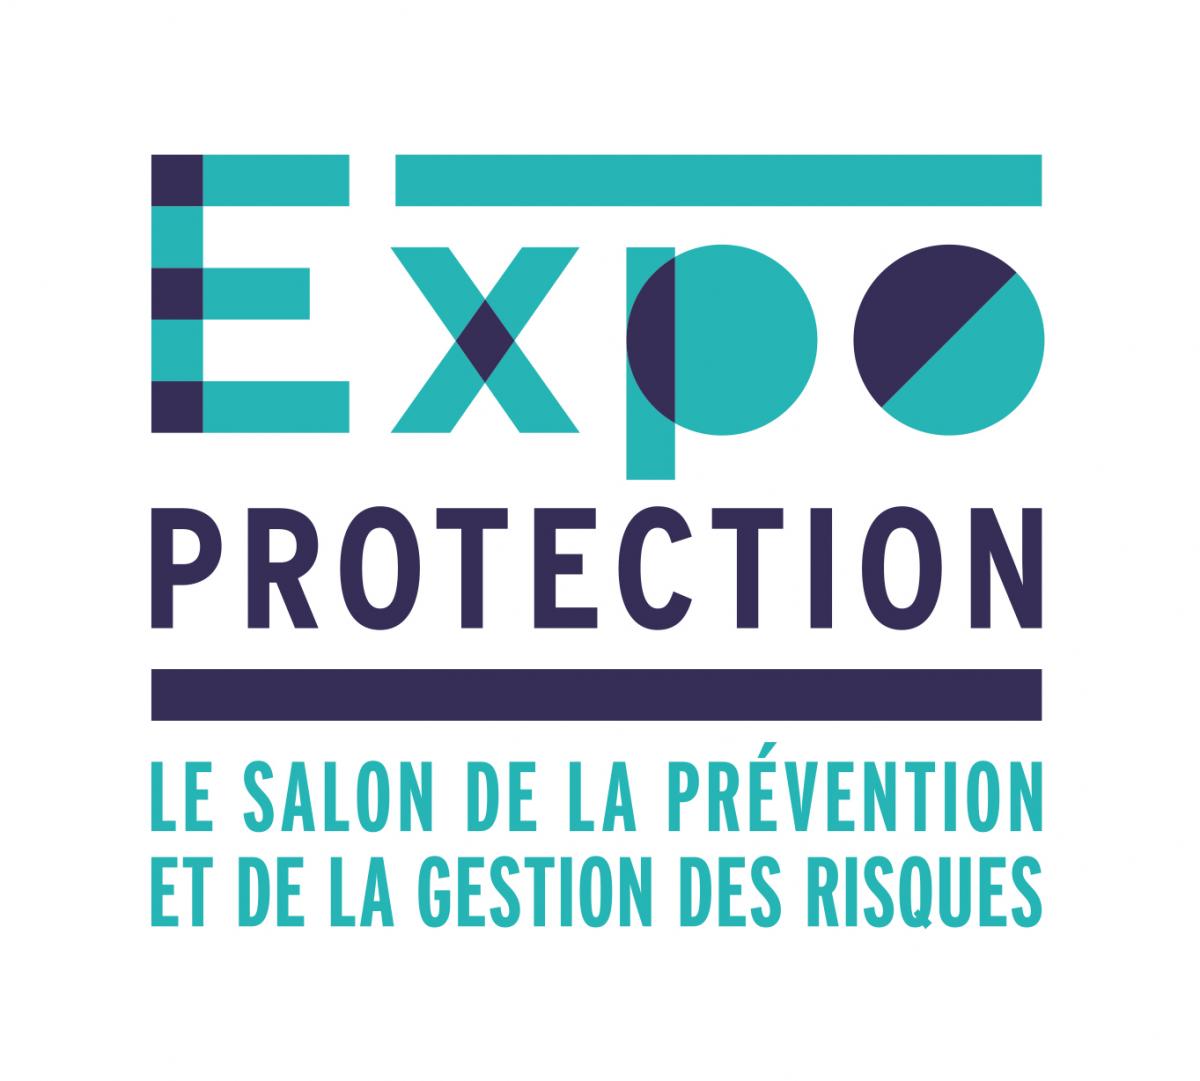 expo protection 2016